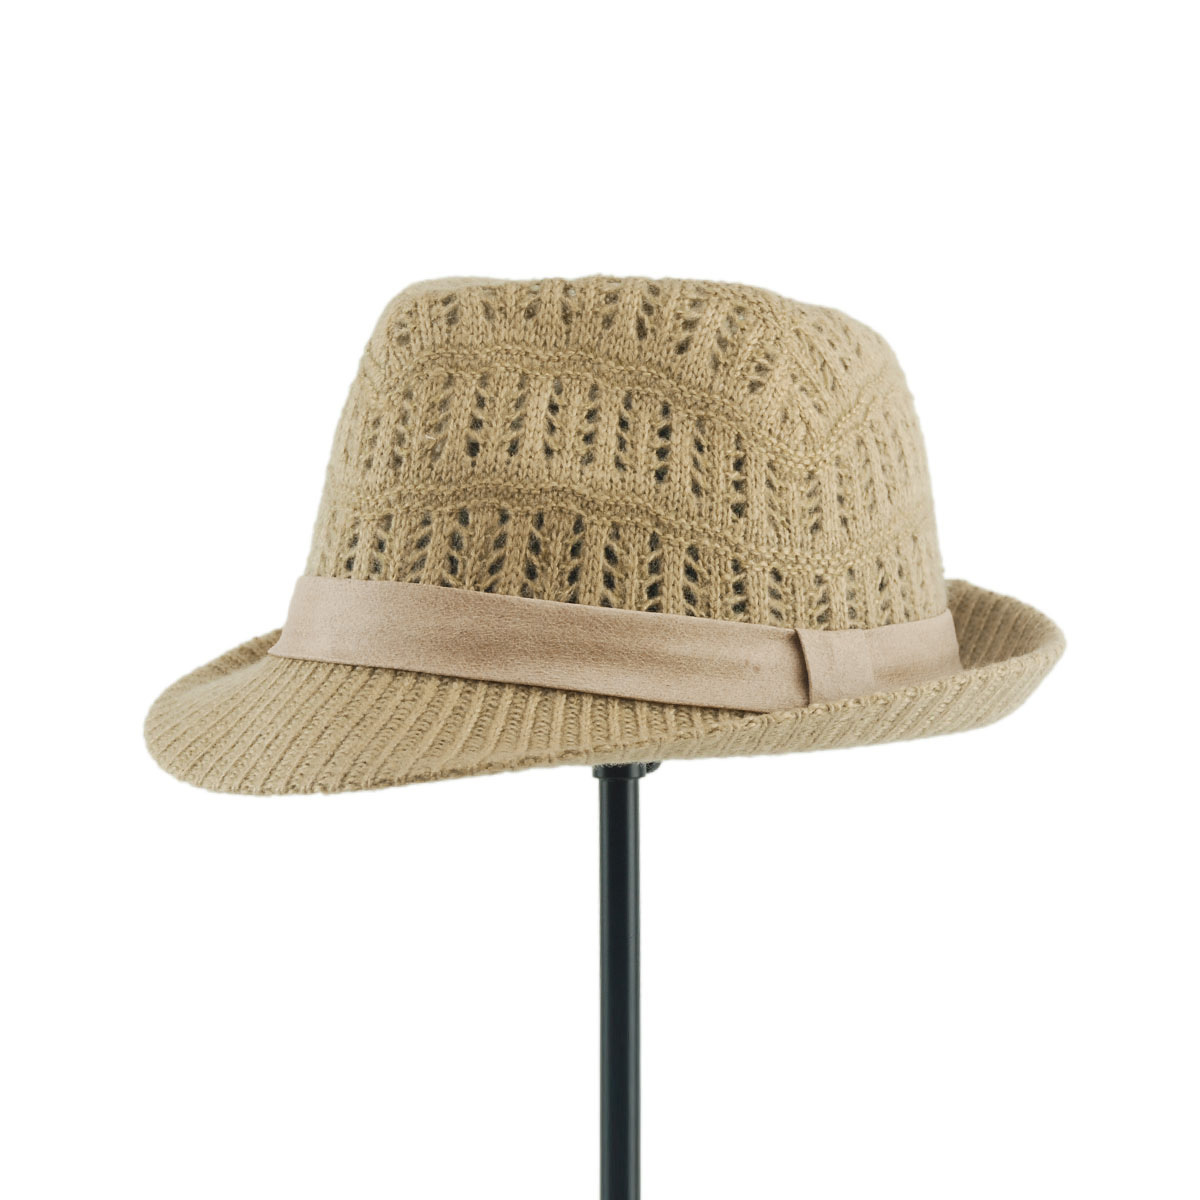 Captale hat autumn winter casual small fedoras cutout pattern